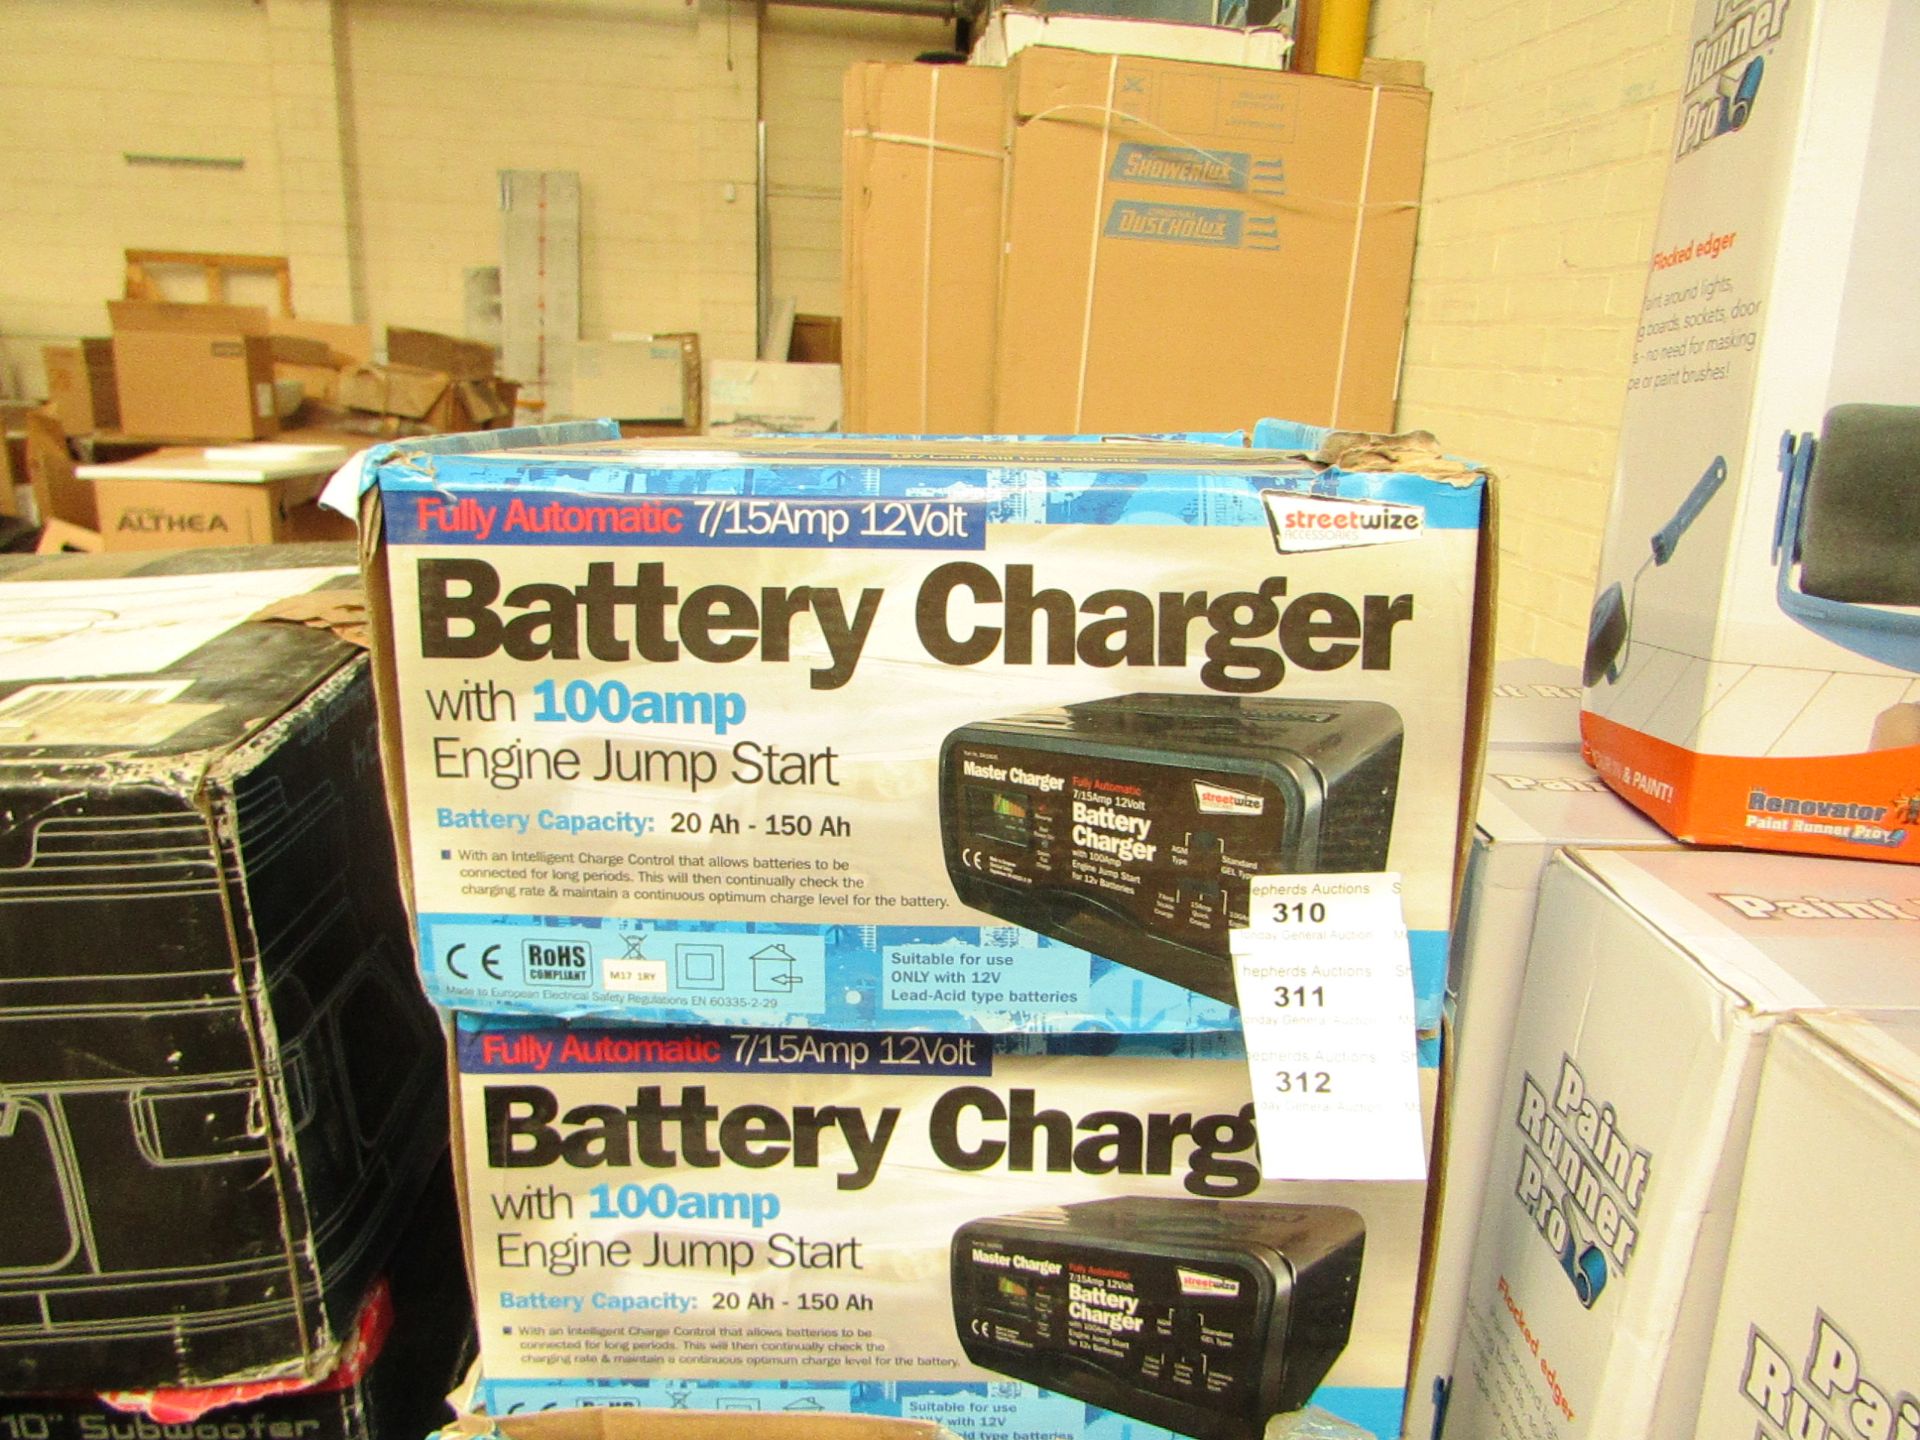 Streetwize 15amp battery charger with 100amp engine jump start, untested and boxed.